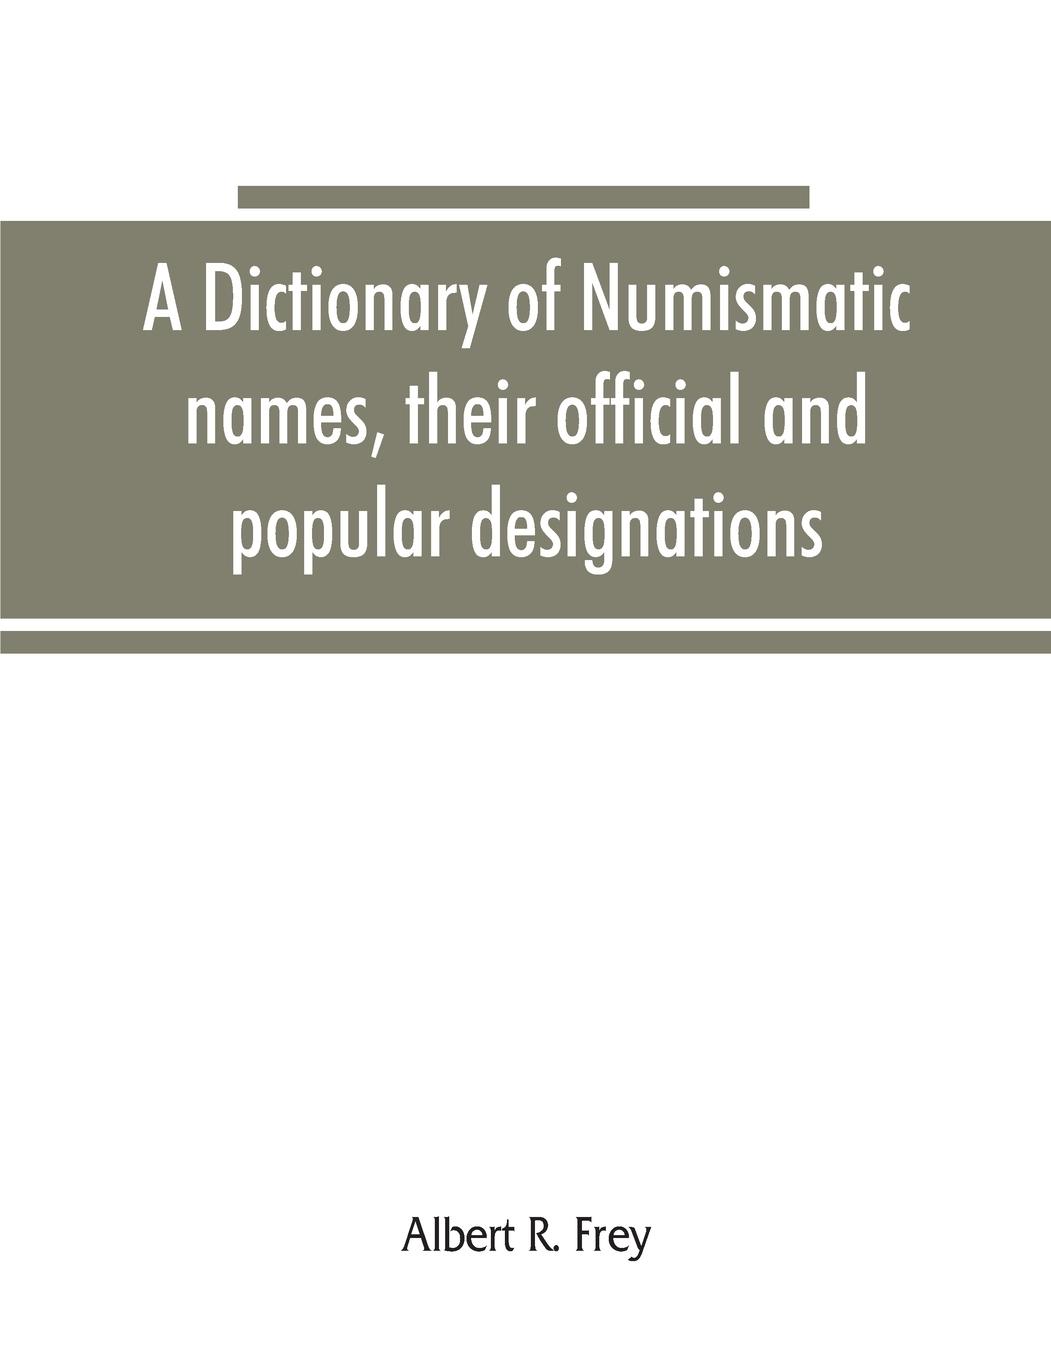 A dictionary of numismatic names, their official and popular designations